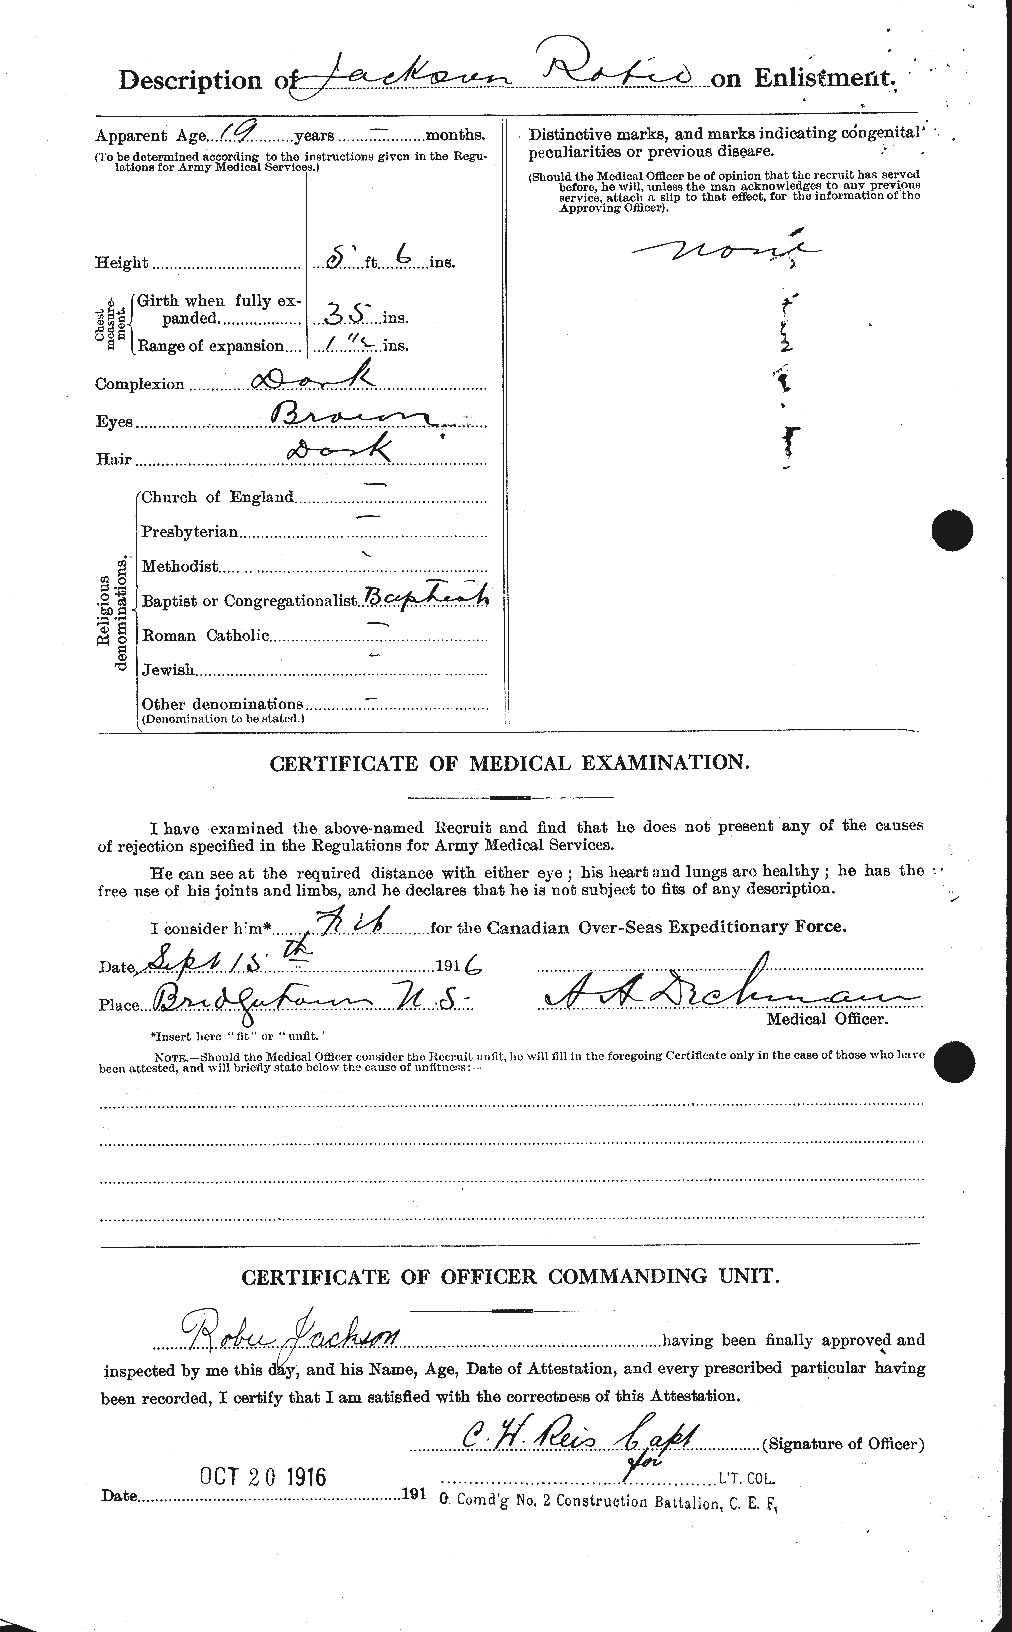 Personnel Records of the First World War - CEF 414529b